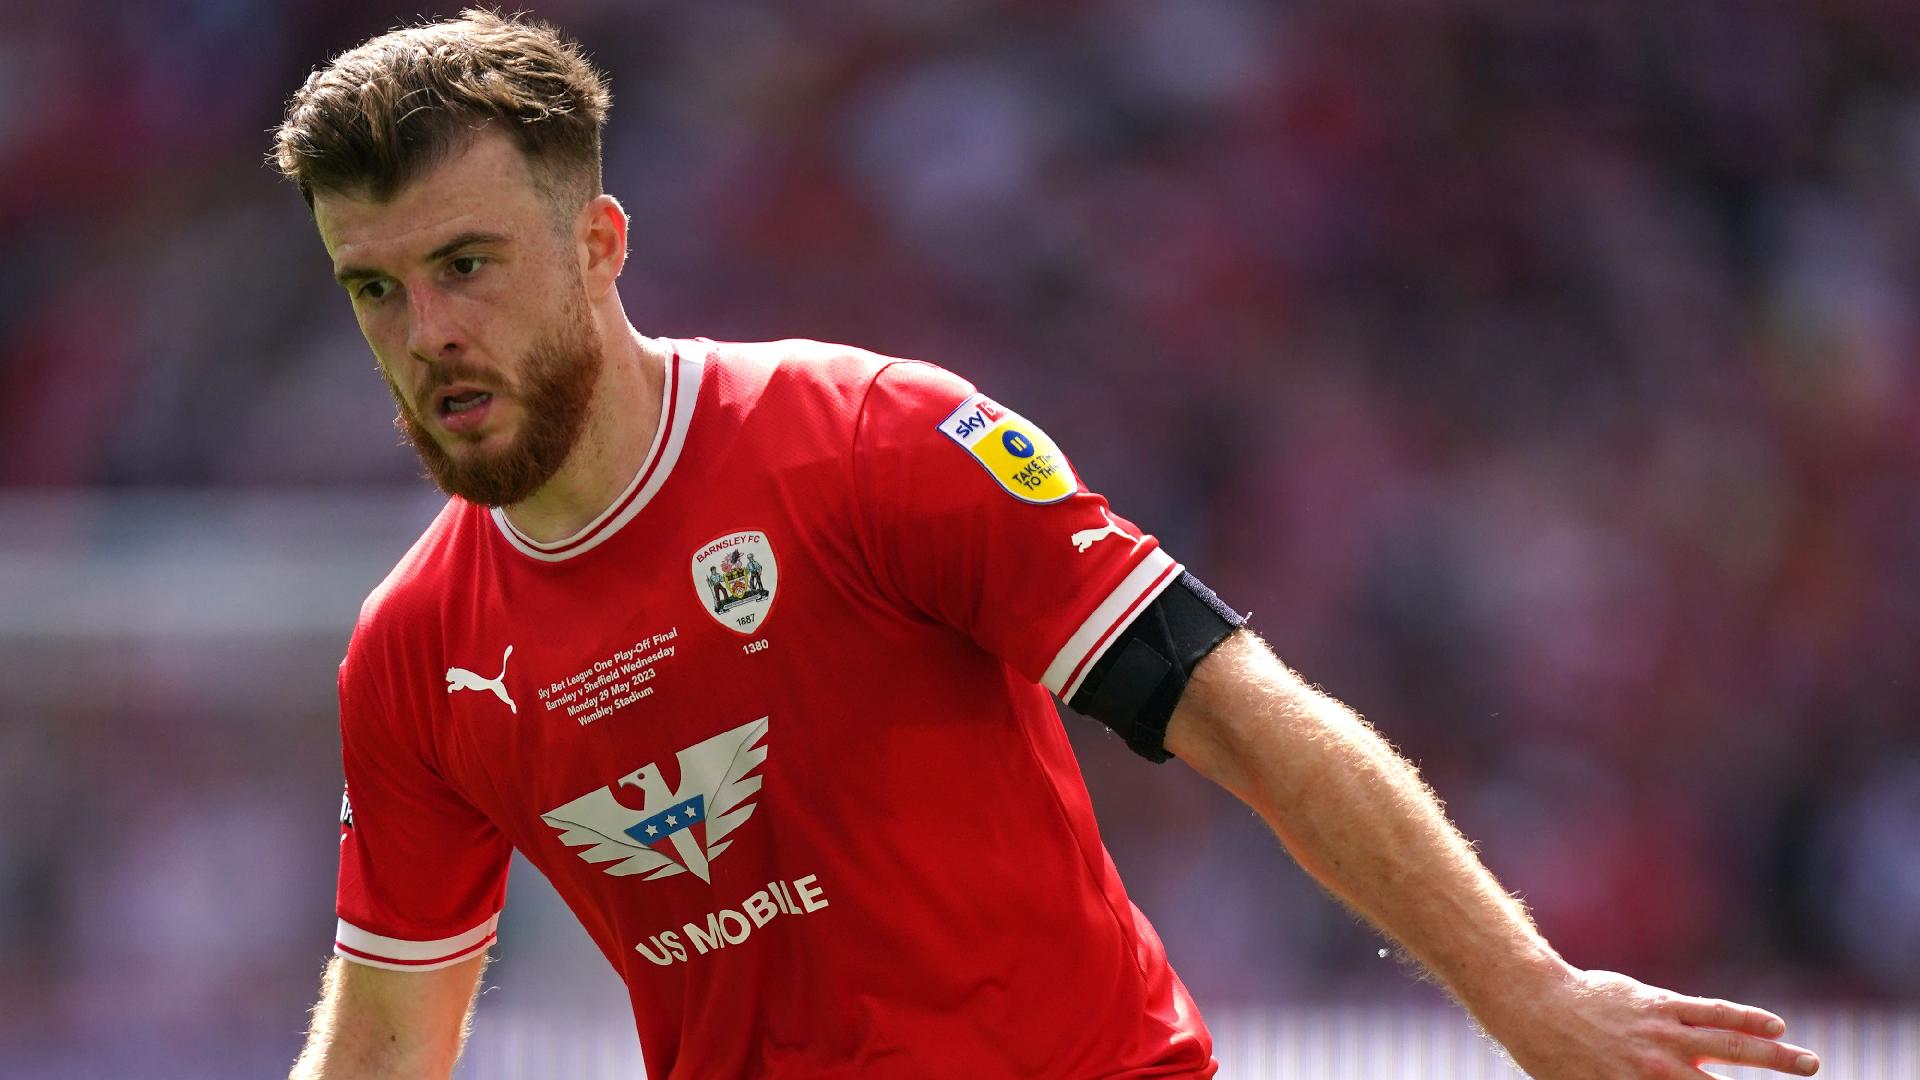 Barnsley win on the road yet again with victory over Cambridge